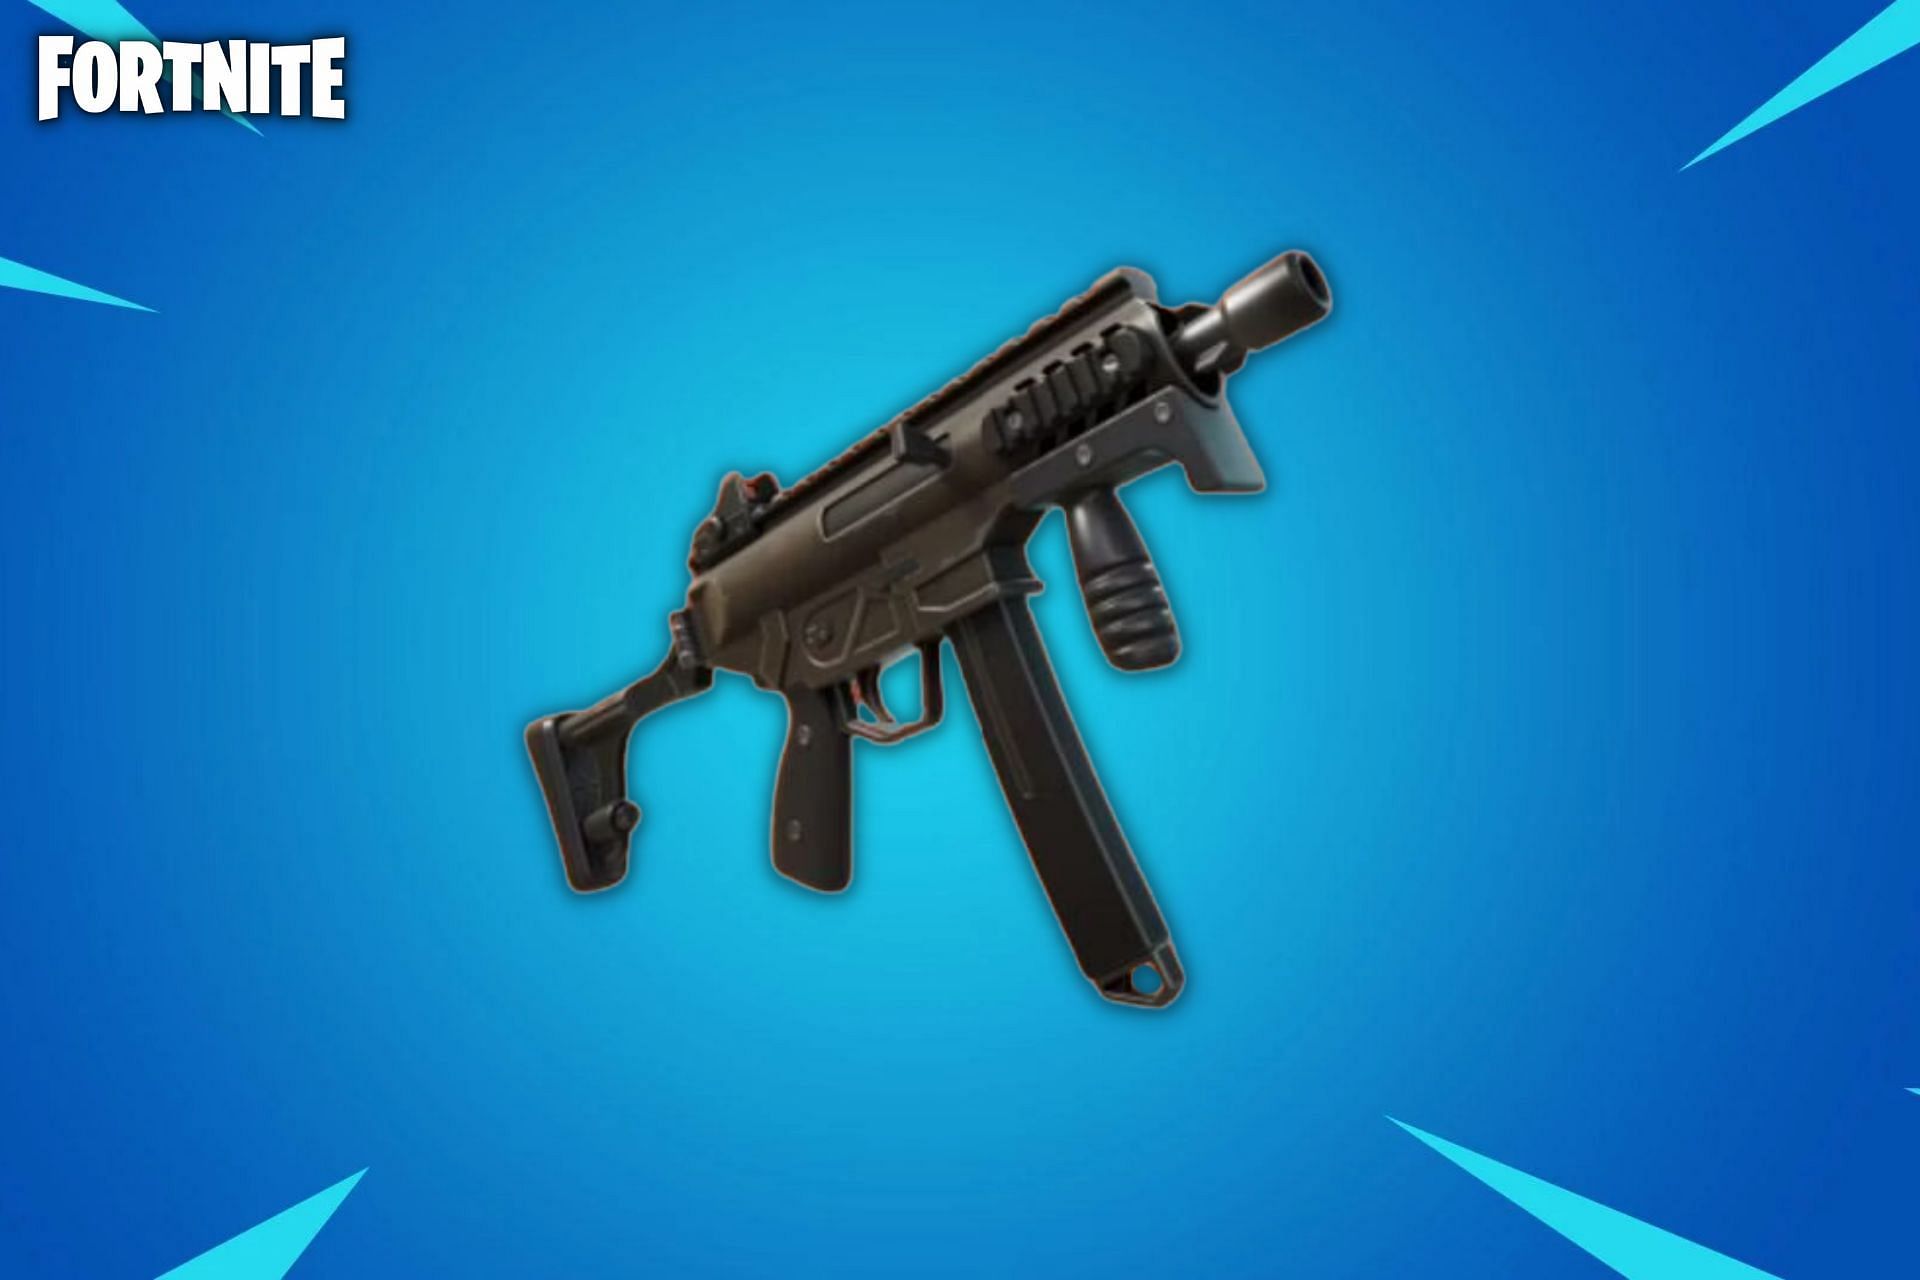 A new Mythic SMG is on its way to Fortnite Chapter 3 (Image via Sportskeeda)